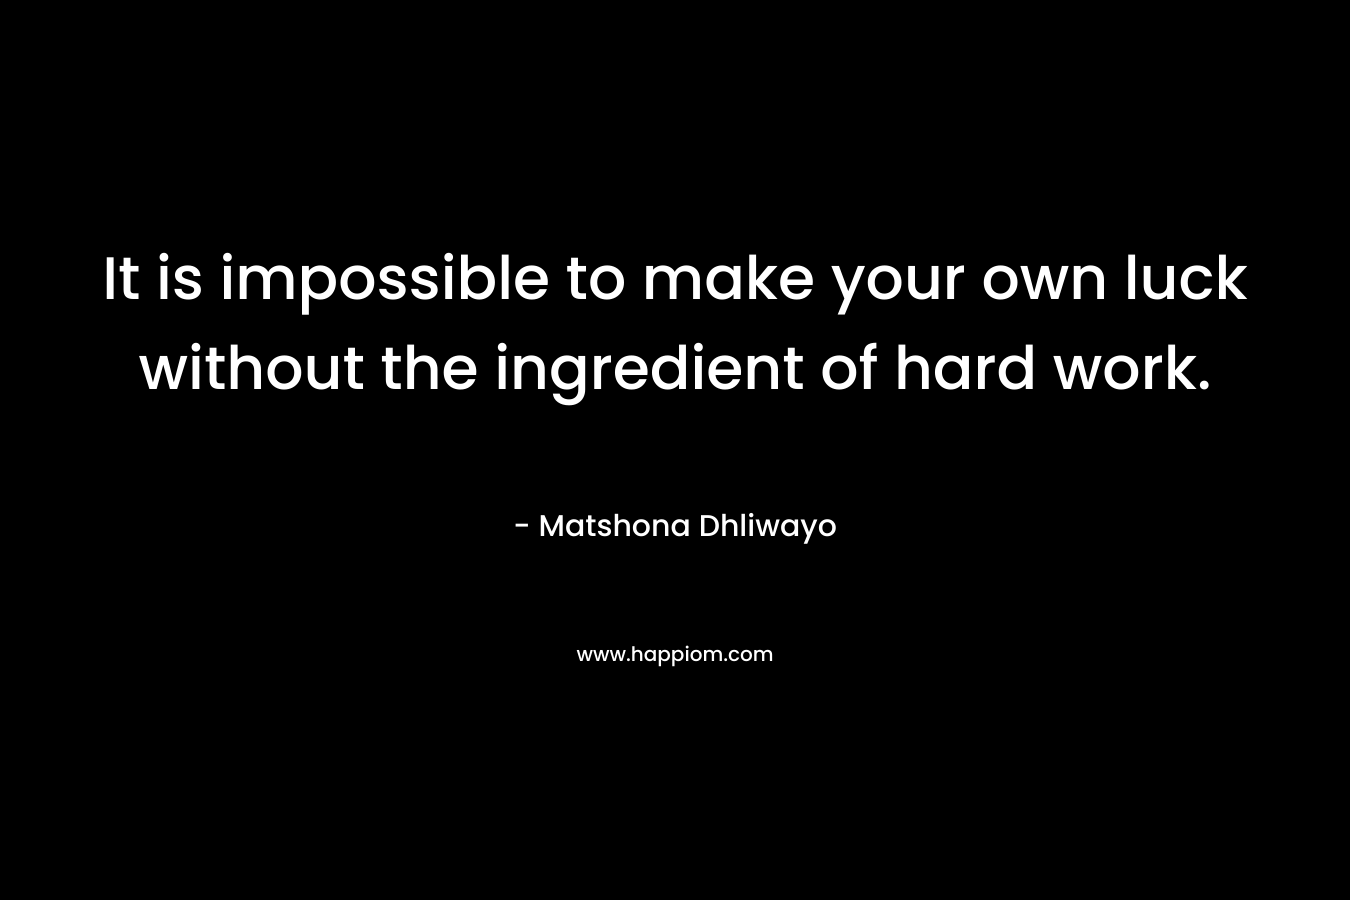 It is impossible to make your own luck without the ingredient of hard work.